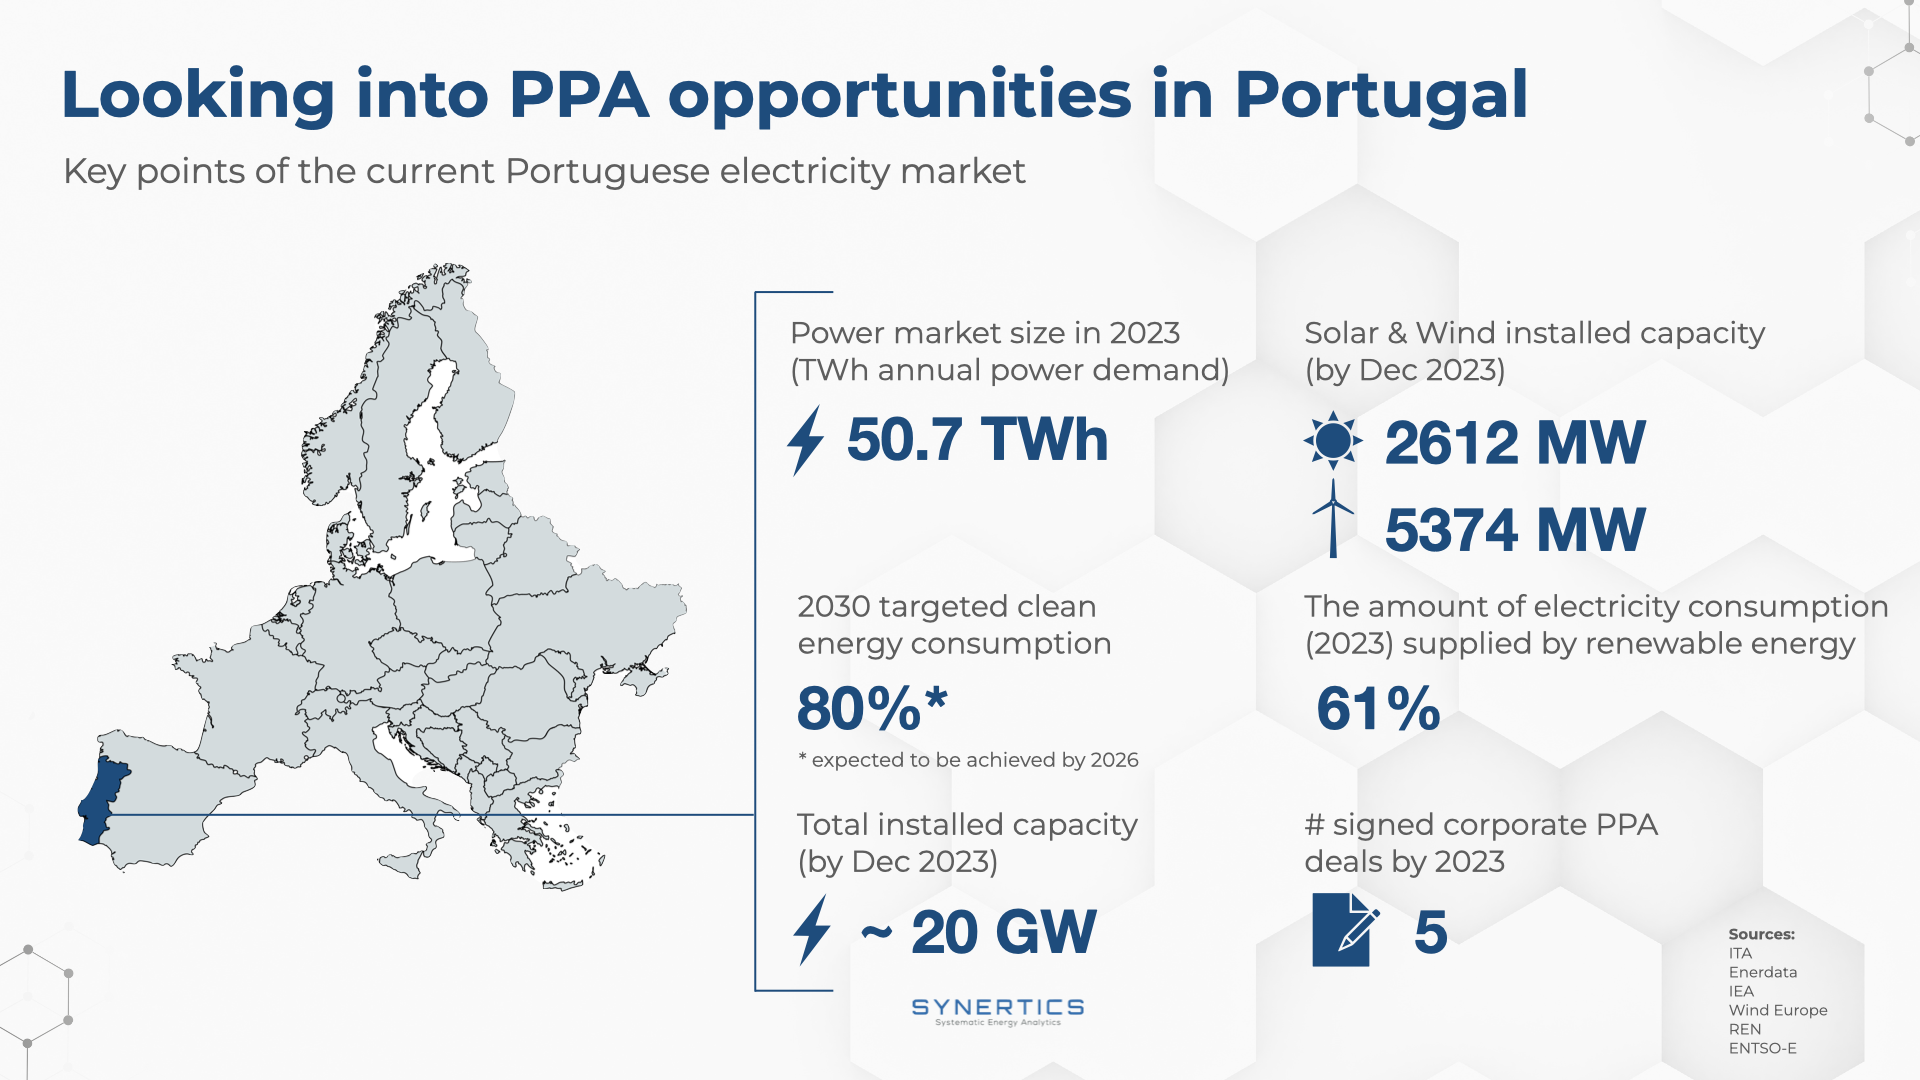 PPAs in Portugal capacities